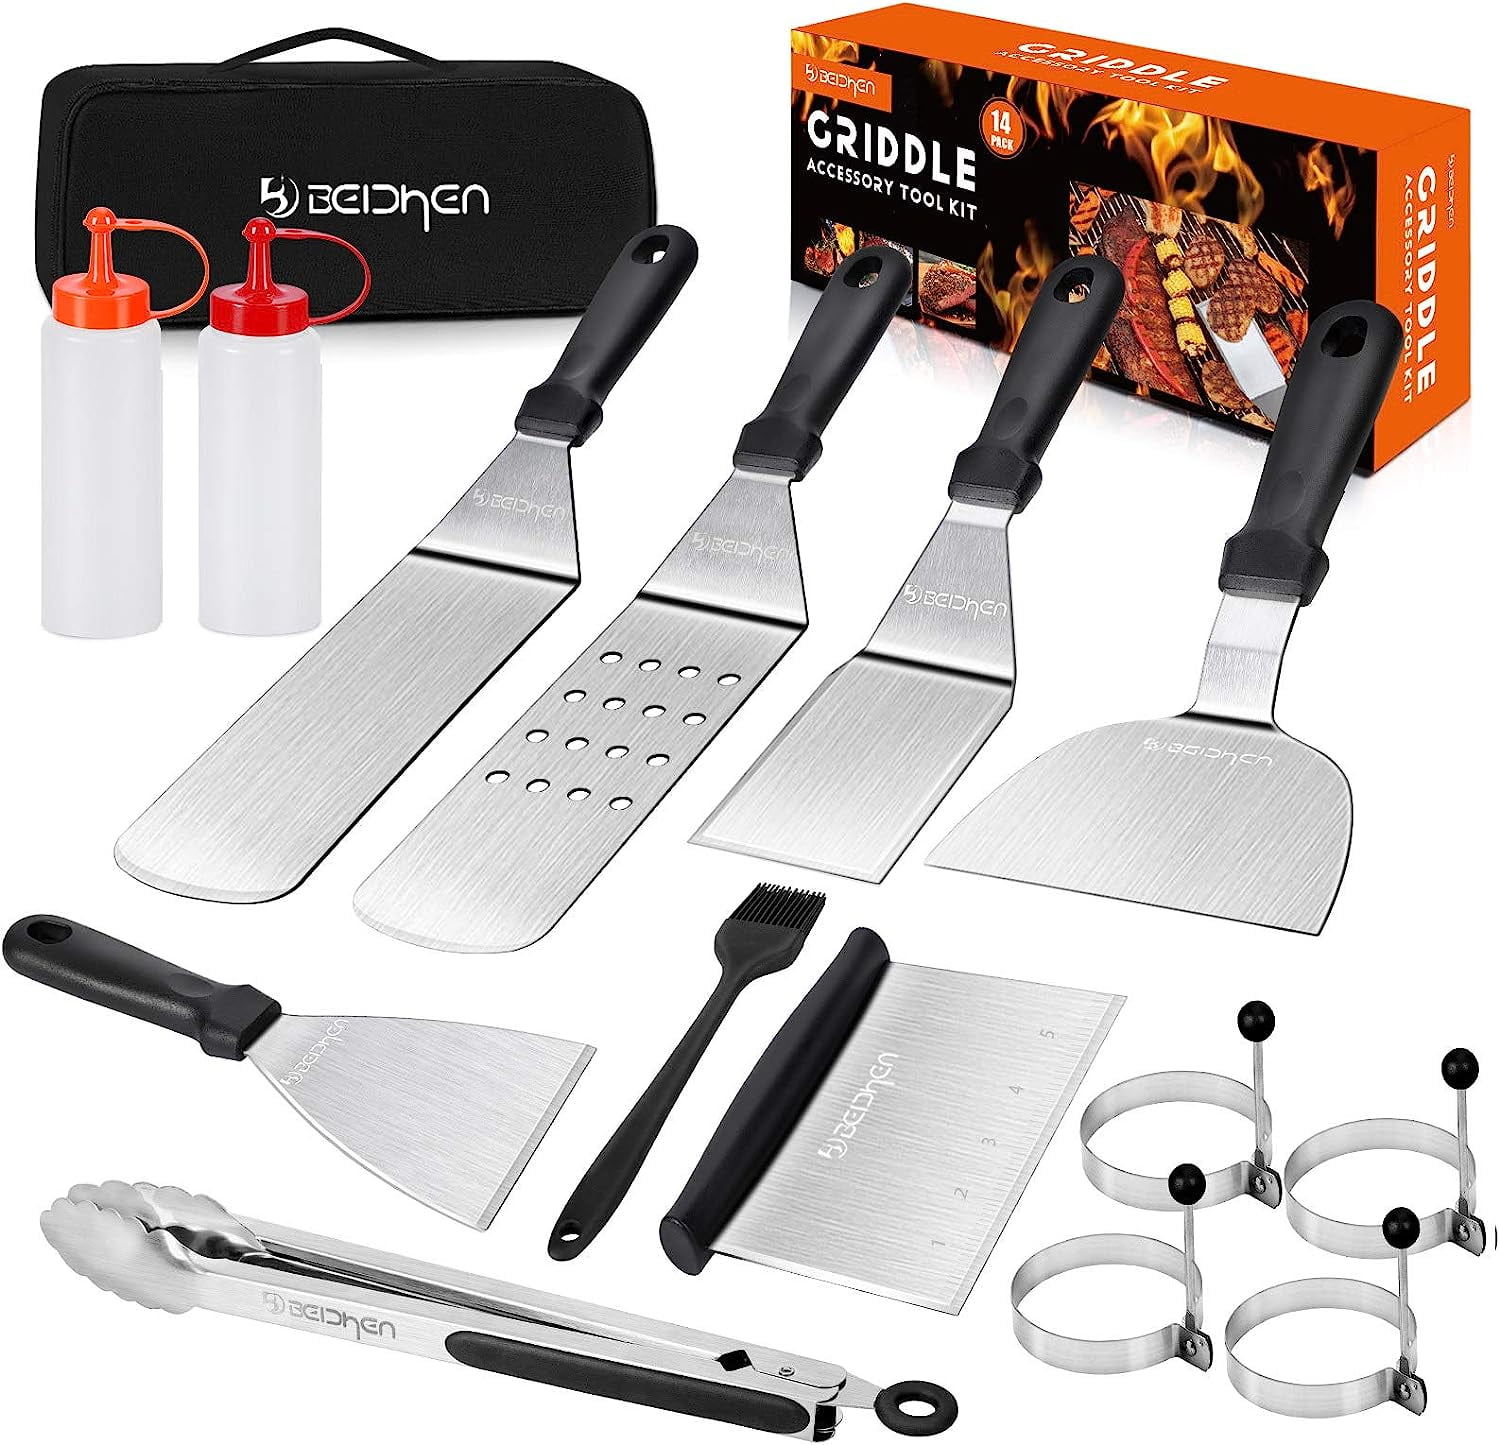 Beichen Griddle Accessories Kit, 34Pcs Stainless Steel Flat Top Grill Tools  Set for Blackstone and Camp Chef, Grilling Spatula Set, Scraper, Carry Bag,  Grill Cleaning Accessories for Men Outdoor BBQ - Yahoo